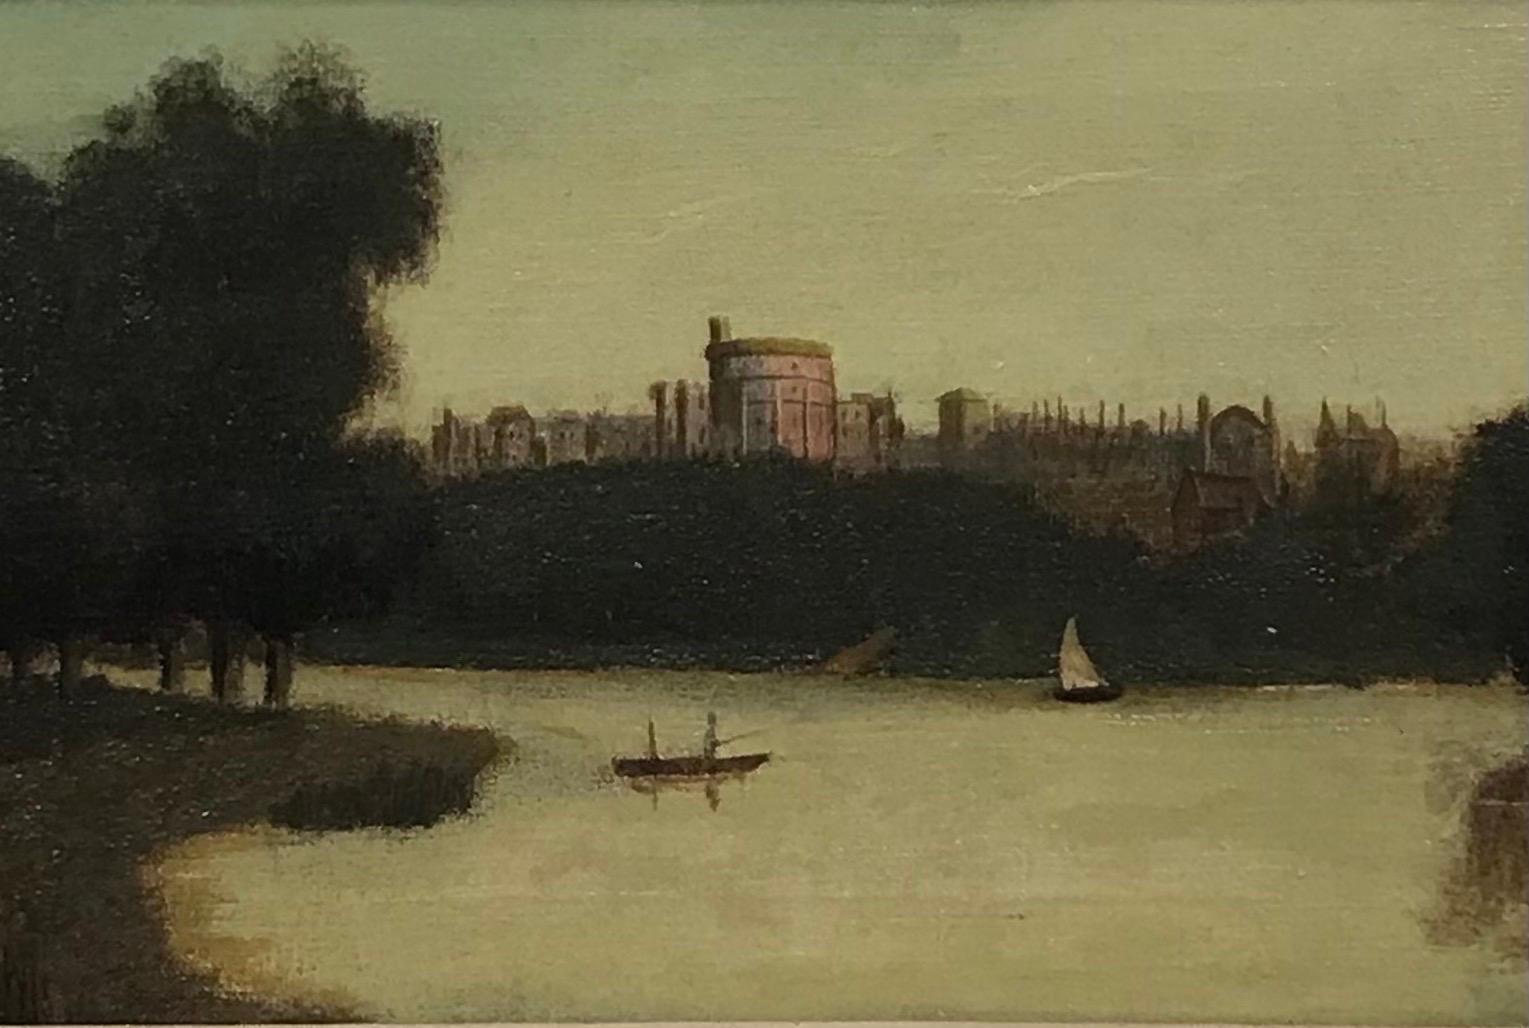 Artist/ School: by J. Lewis, British late 19th century, signed lower left corner

Title: Windsor Castle at Sunset, viewed from the River Thames

Medium: oil on canvas, framed

Framed: 12.75 x 16.5 inches
Canvas: 8 x 12 inches

Provenance: private